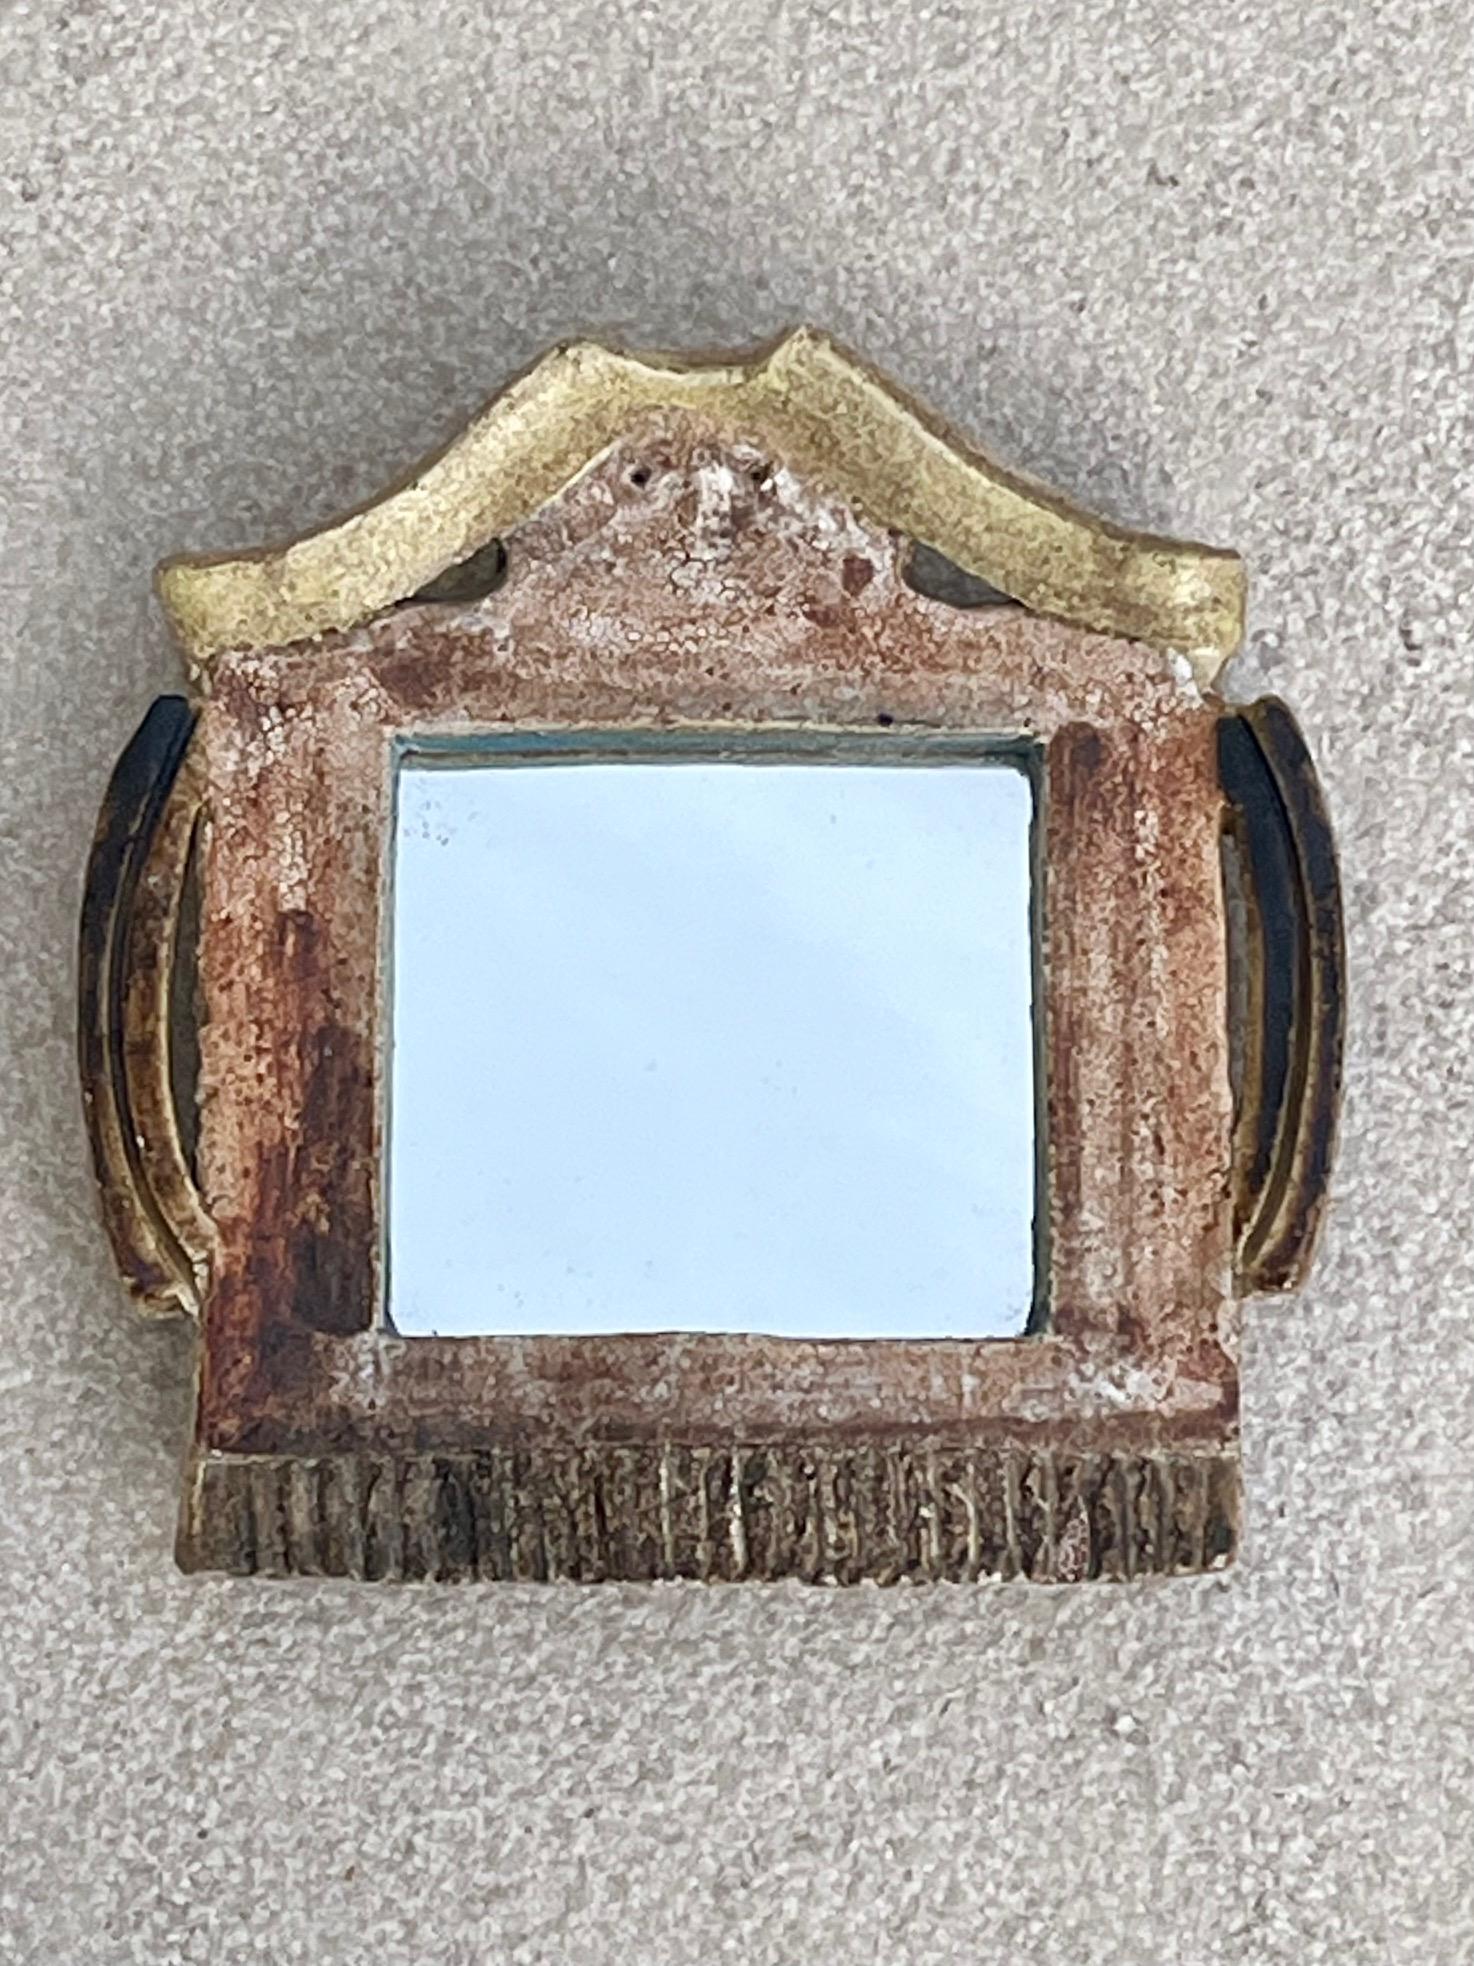 Ceramic mirror.
Glazed ceramic in shades of blue, ochre and yellow.
Architectural construction with pediment at the top.
Underneath, a stylized face can be seen with eyes and nose ( see detail photo) 
 Signed at the back 